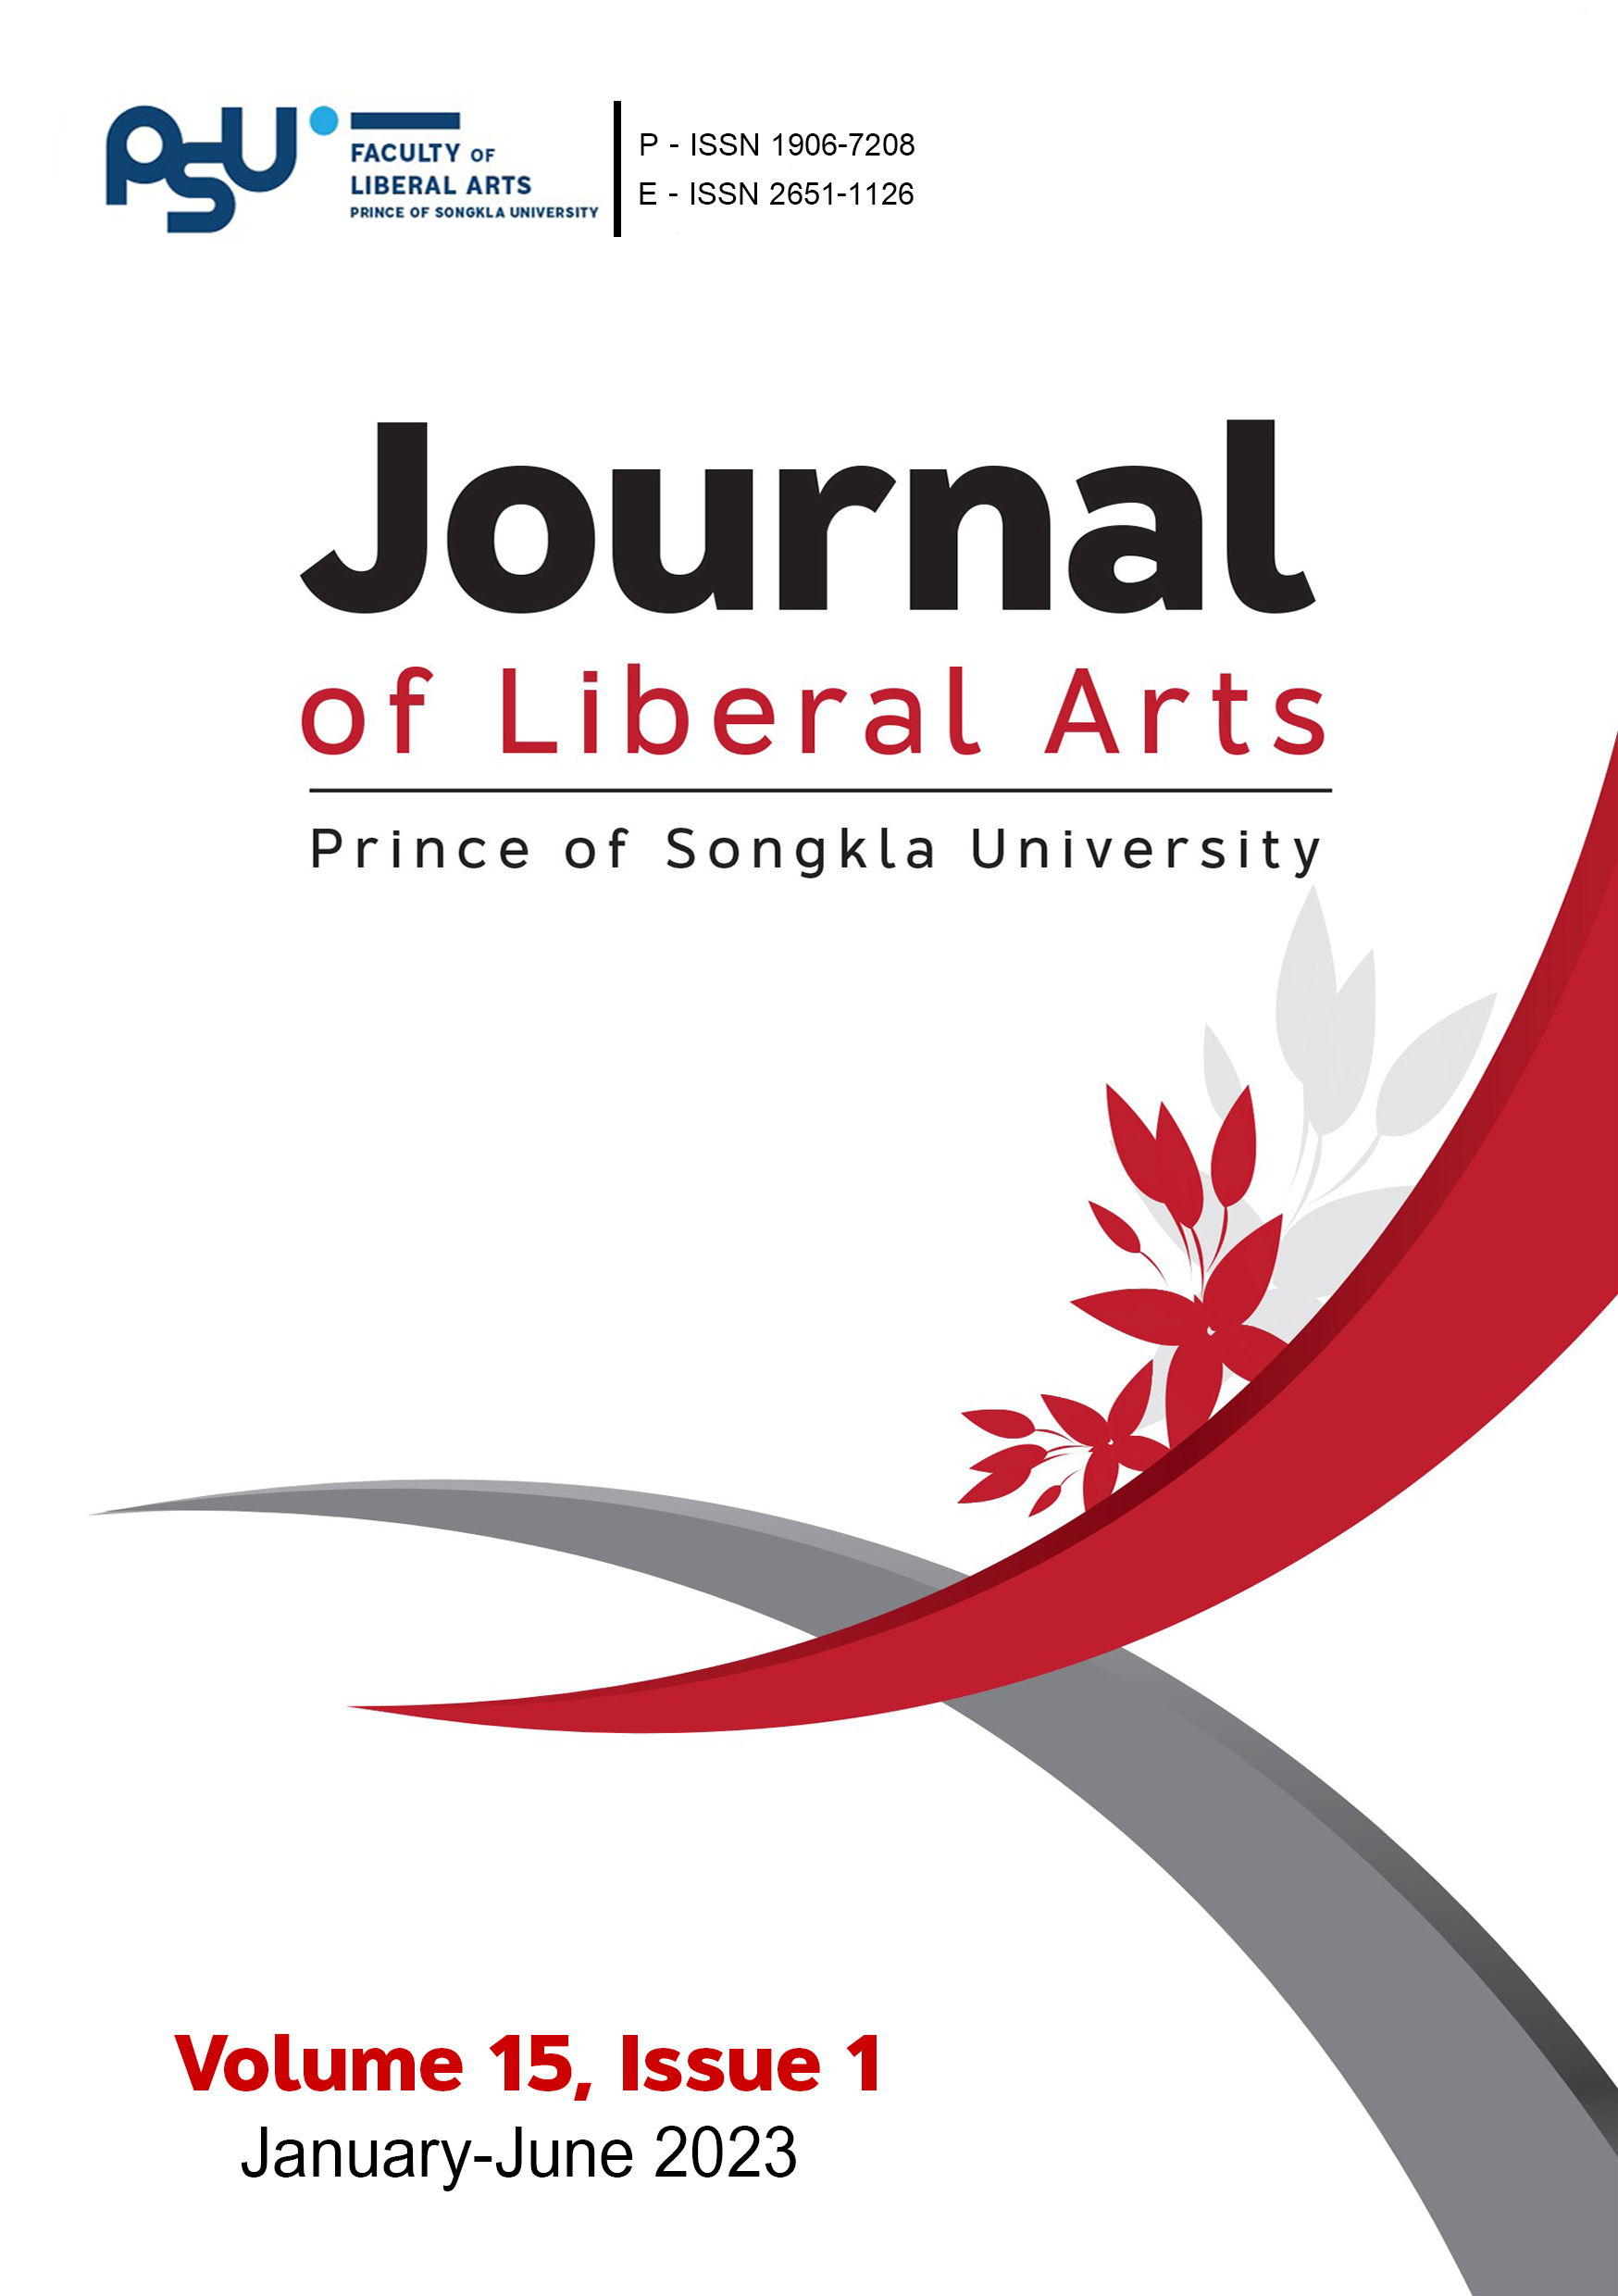 					View Vol. 15 No. 1 (2023): Journal of Liberal Arts, Prince of Songkla University 
				